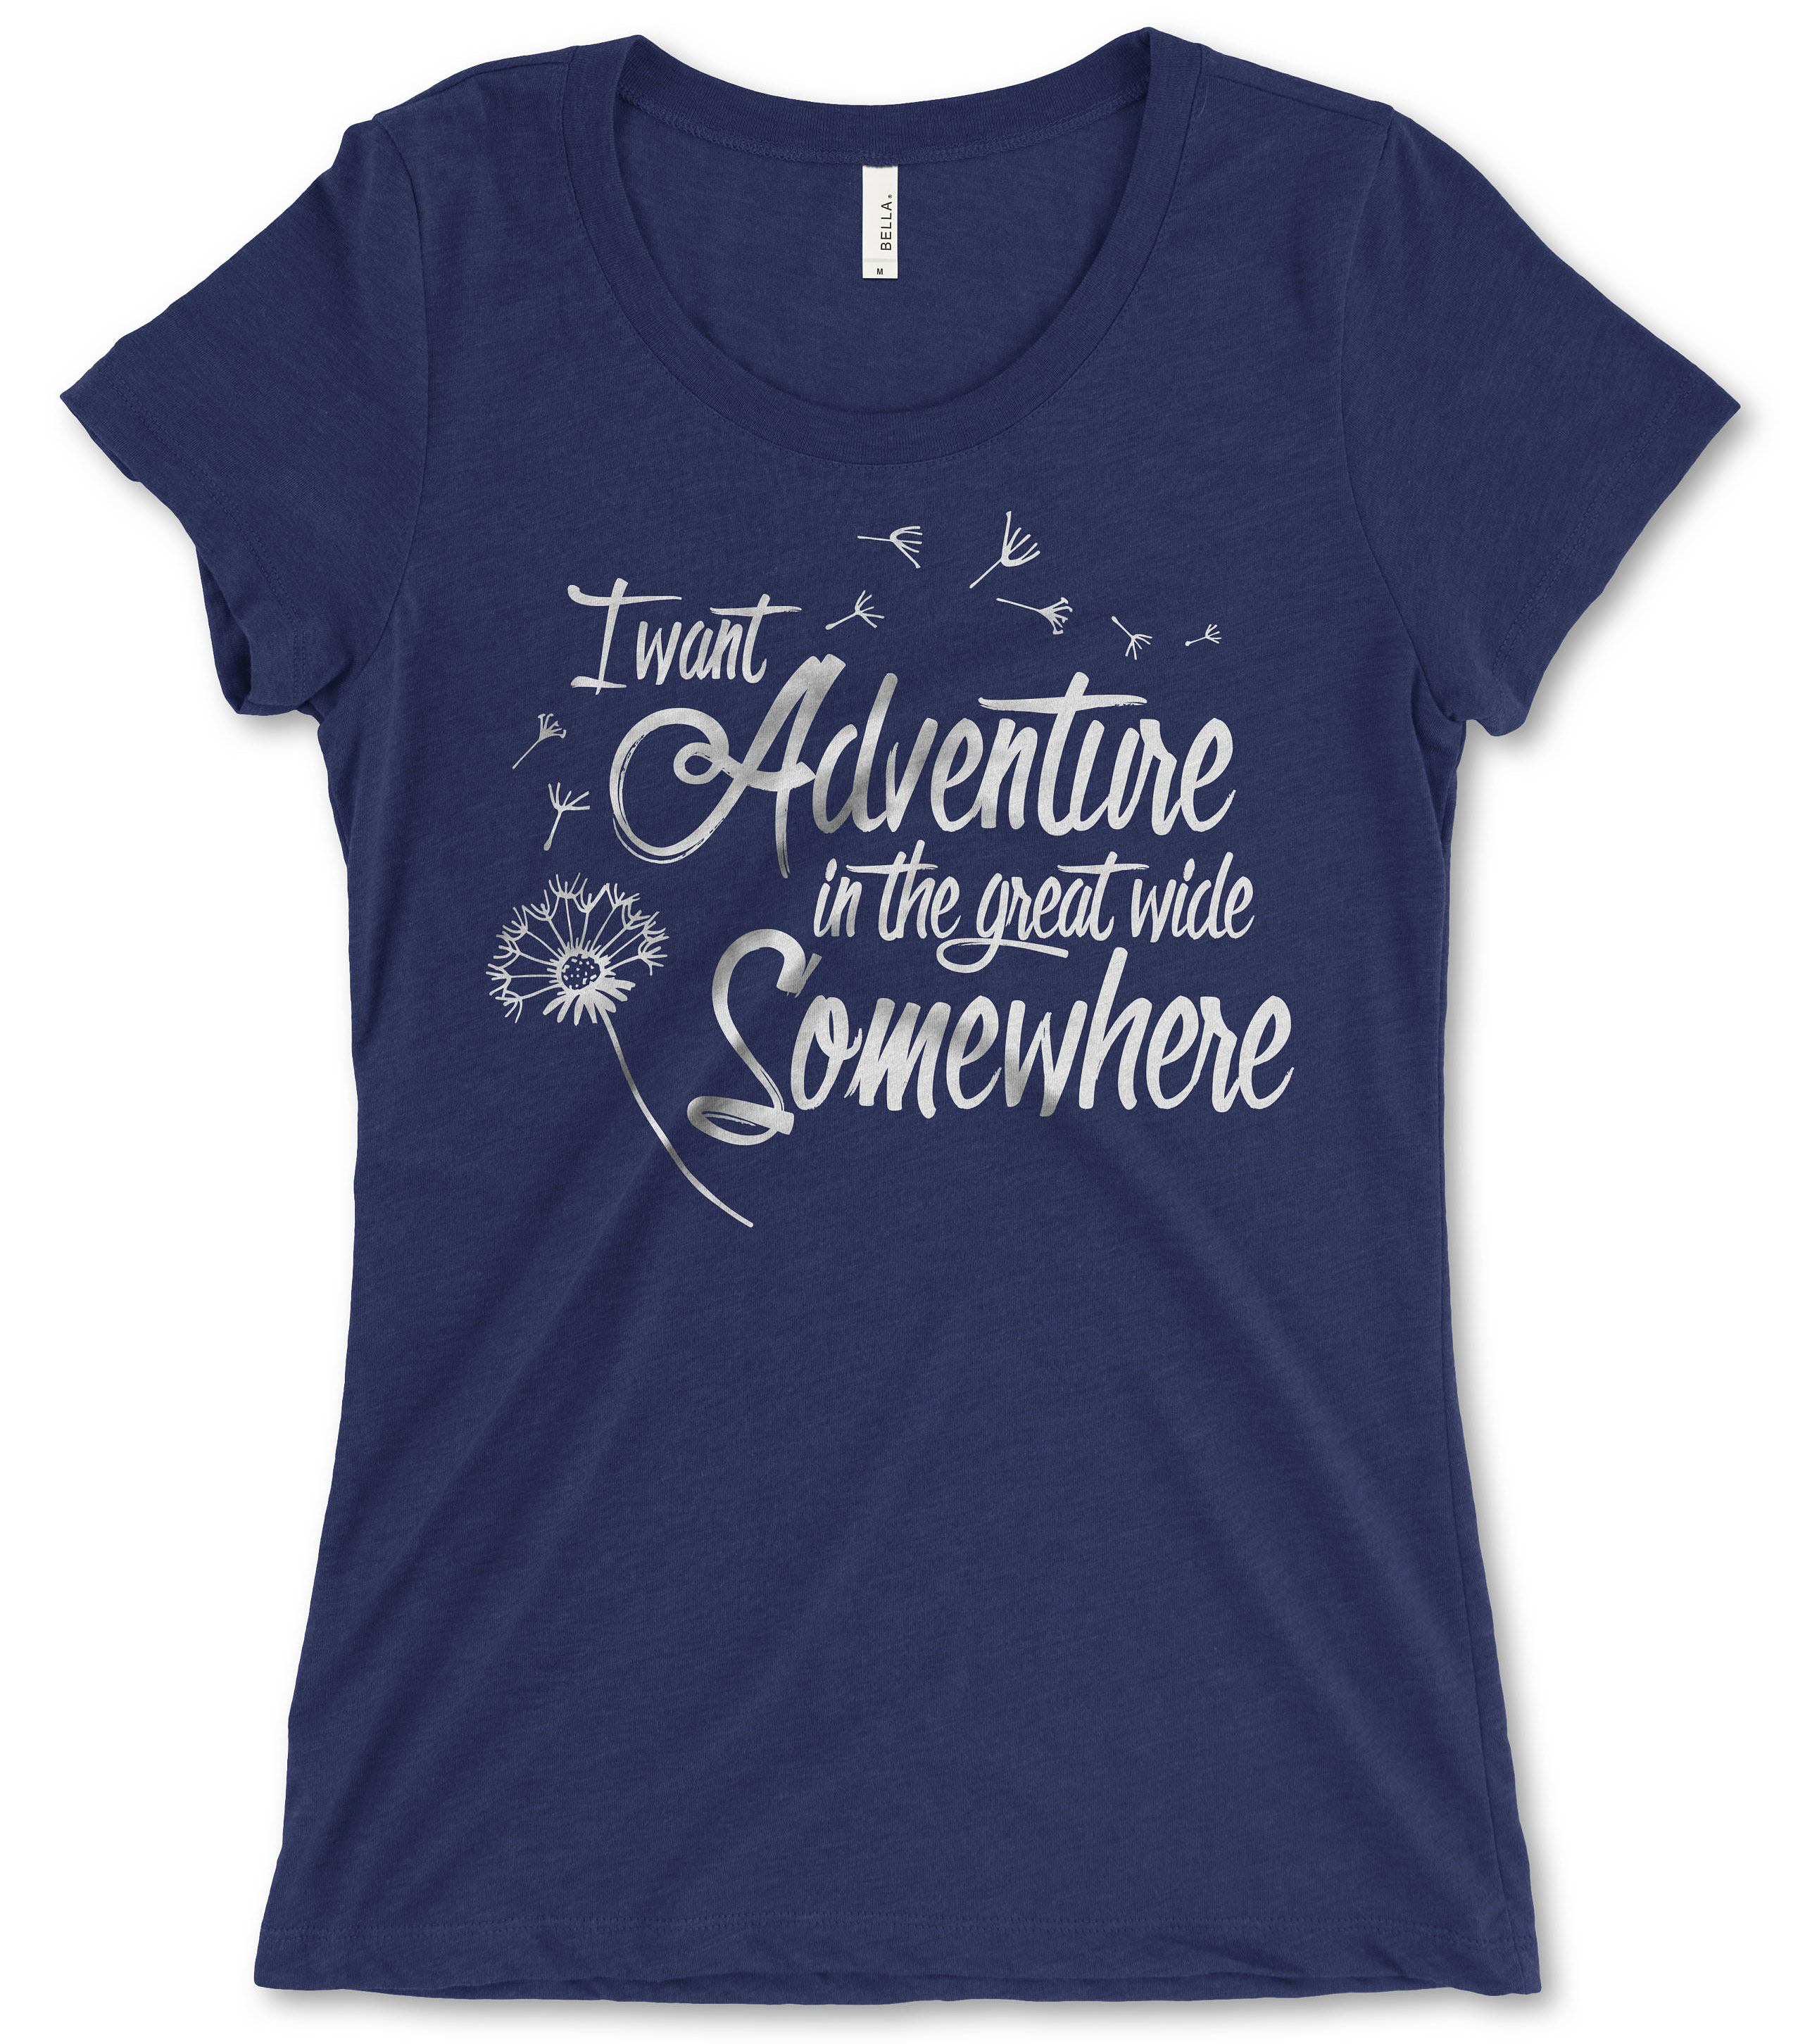 'I Want Adventure in the Great Wide Somewhere' T-Shirt